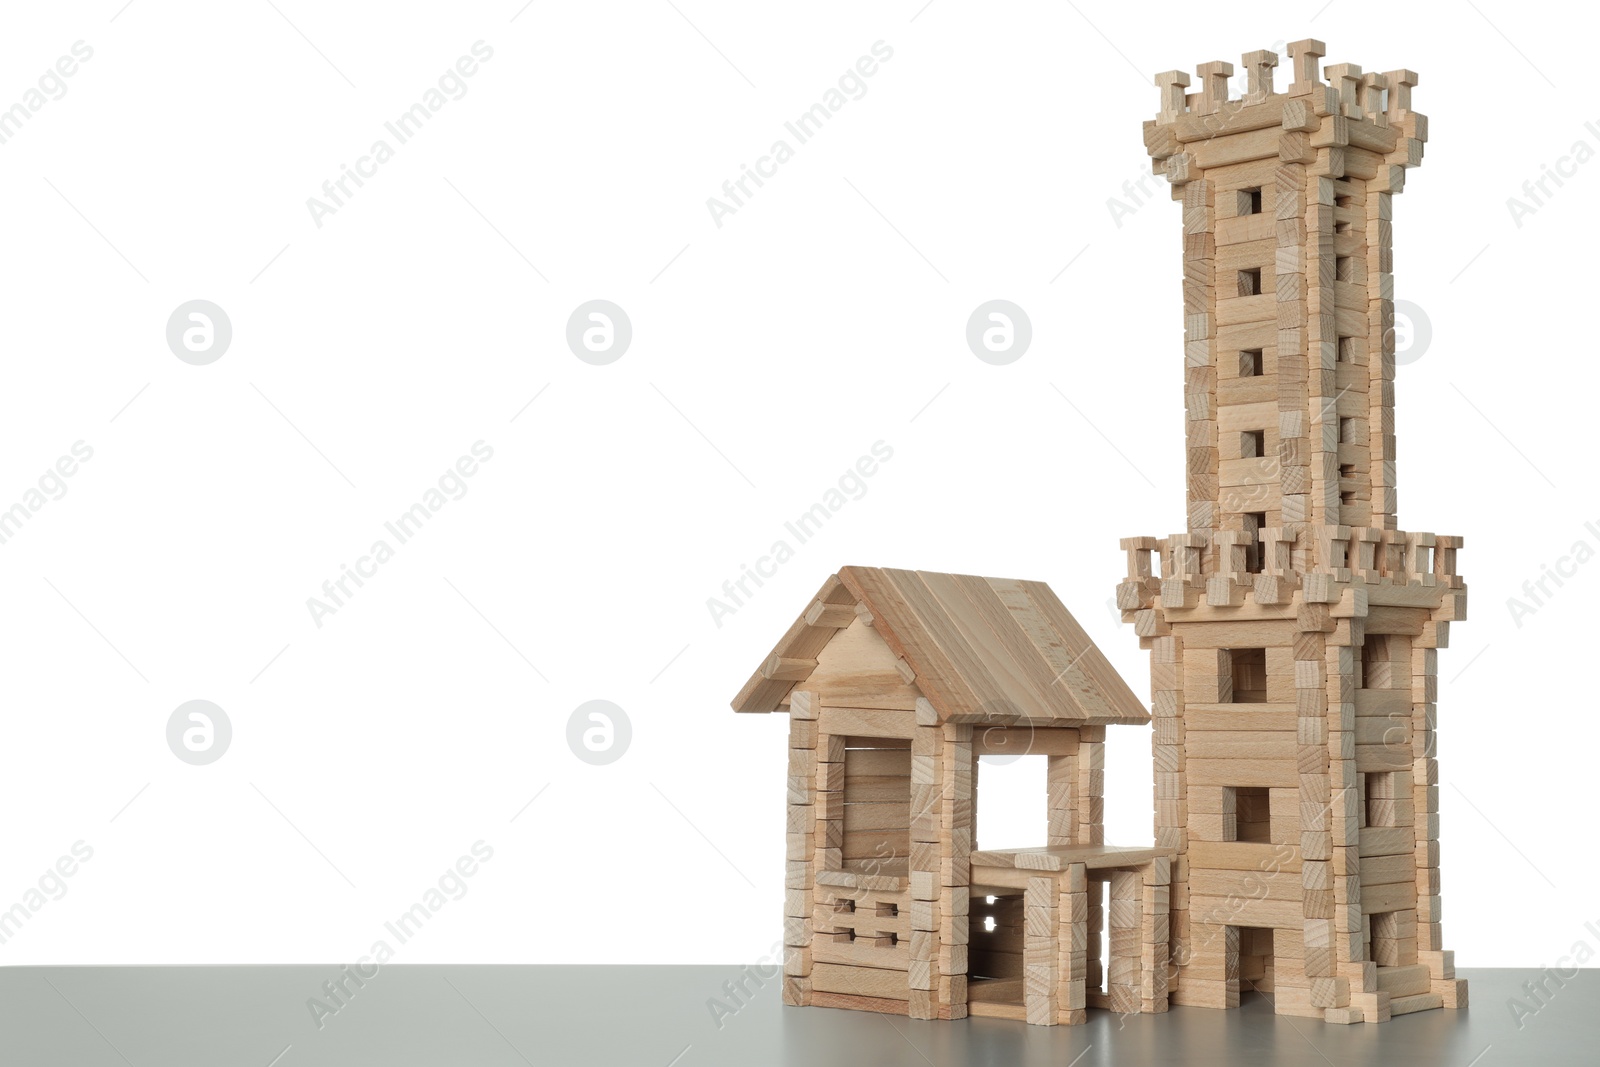 Photo of Wooden tower and building on light grey table against white background, space for text. Children's toy